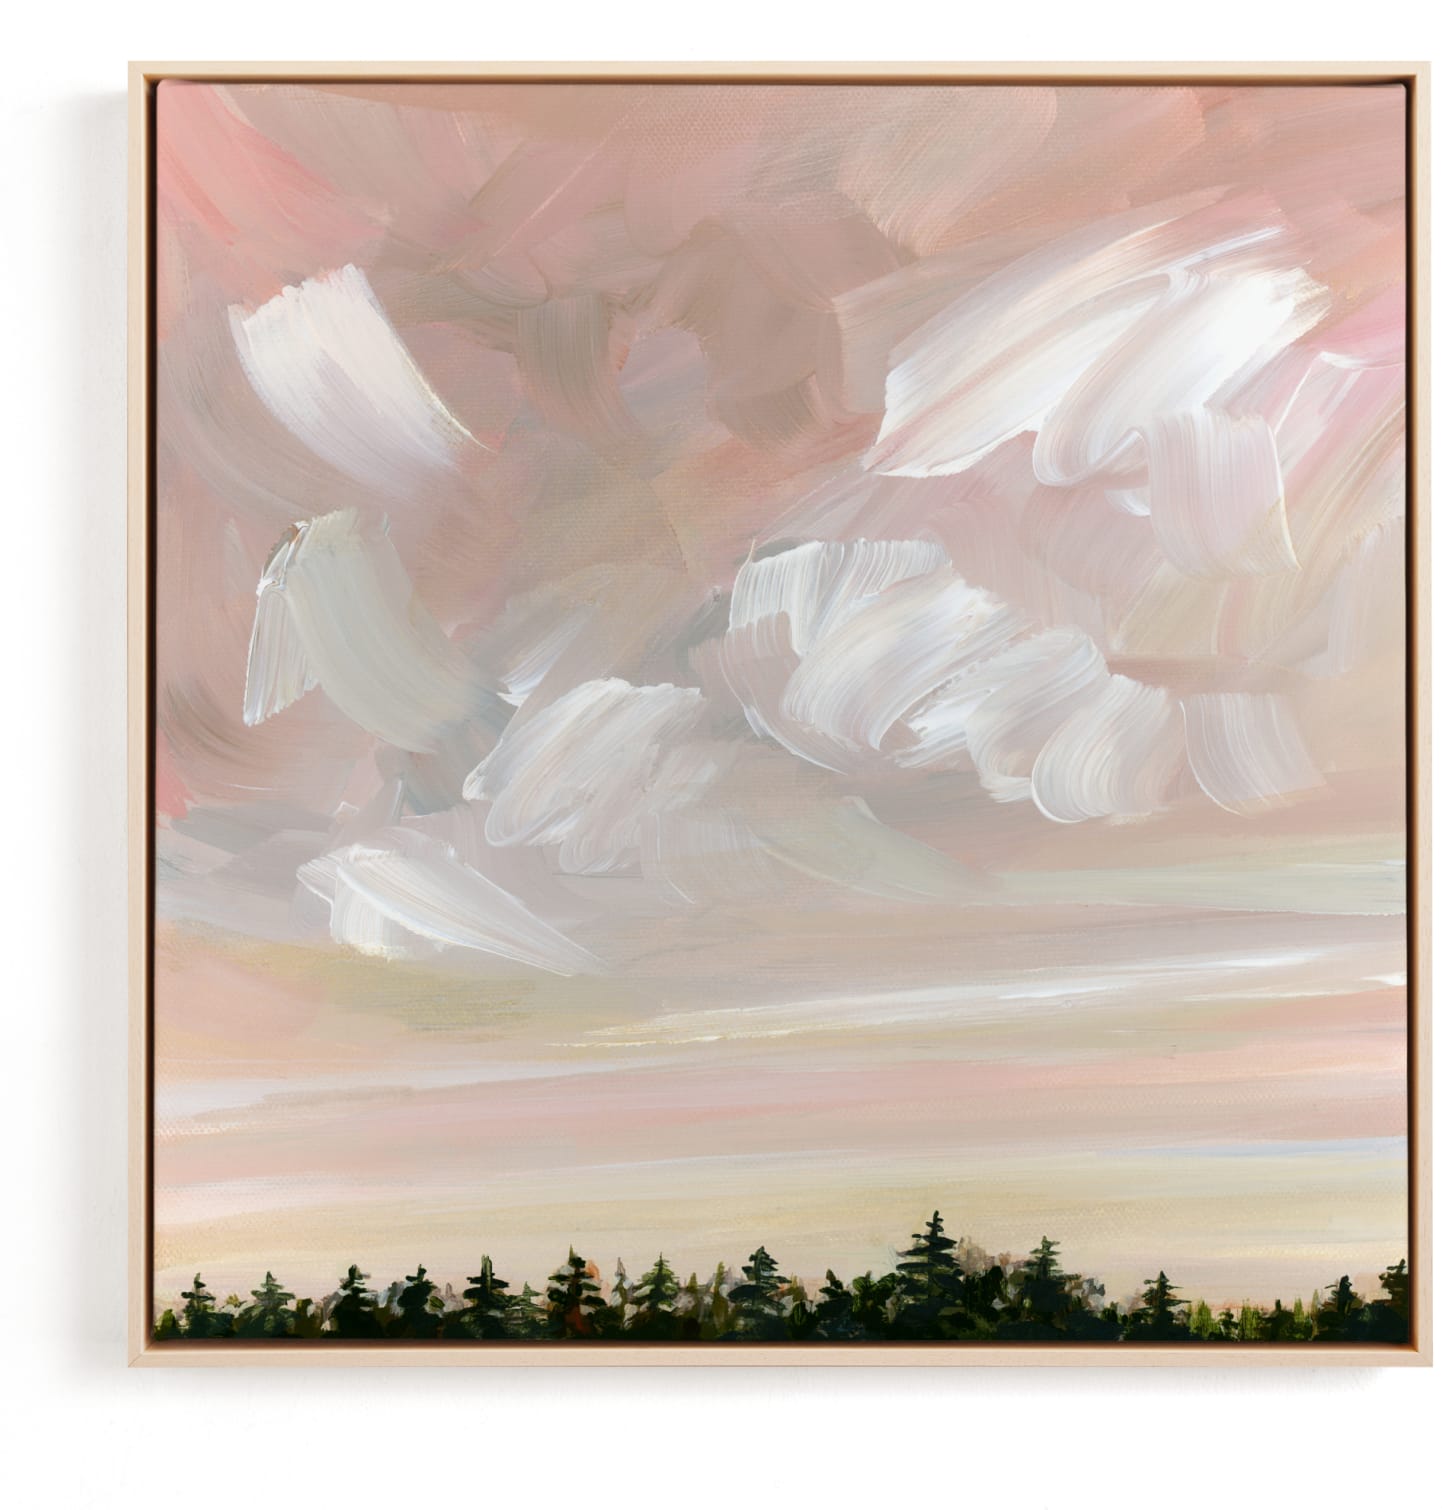 This is a white, pink, gold art by Nicole Walsh called Above the Trees.